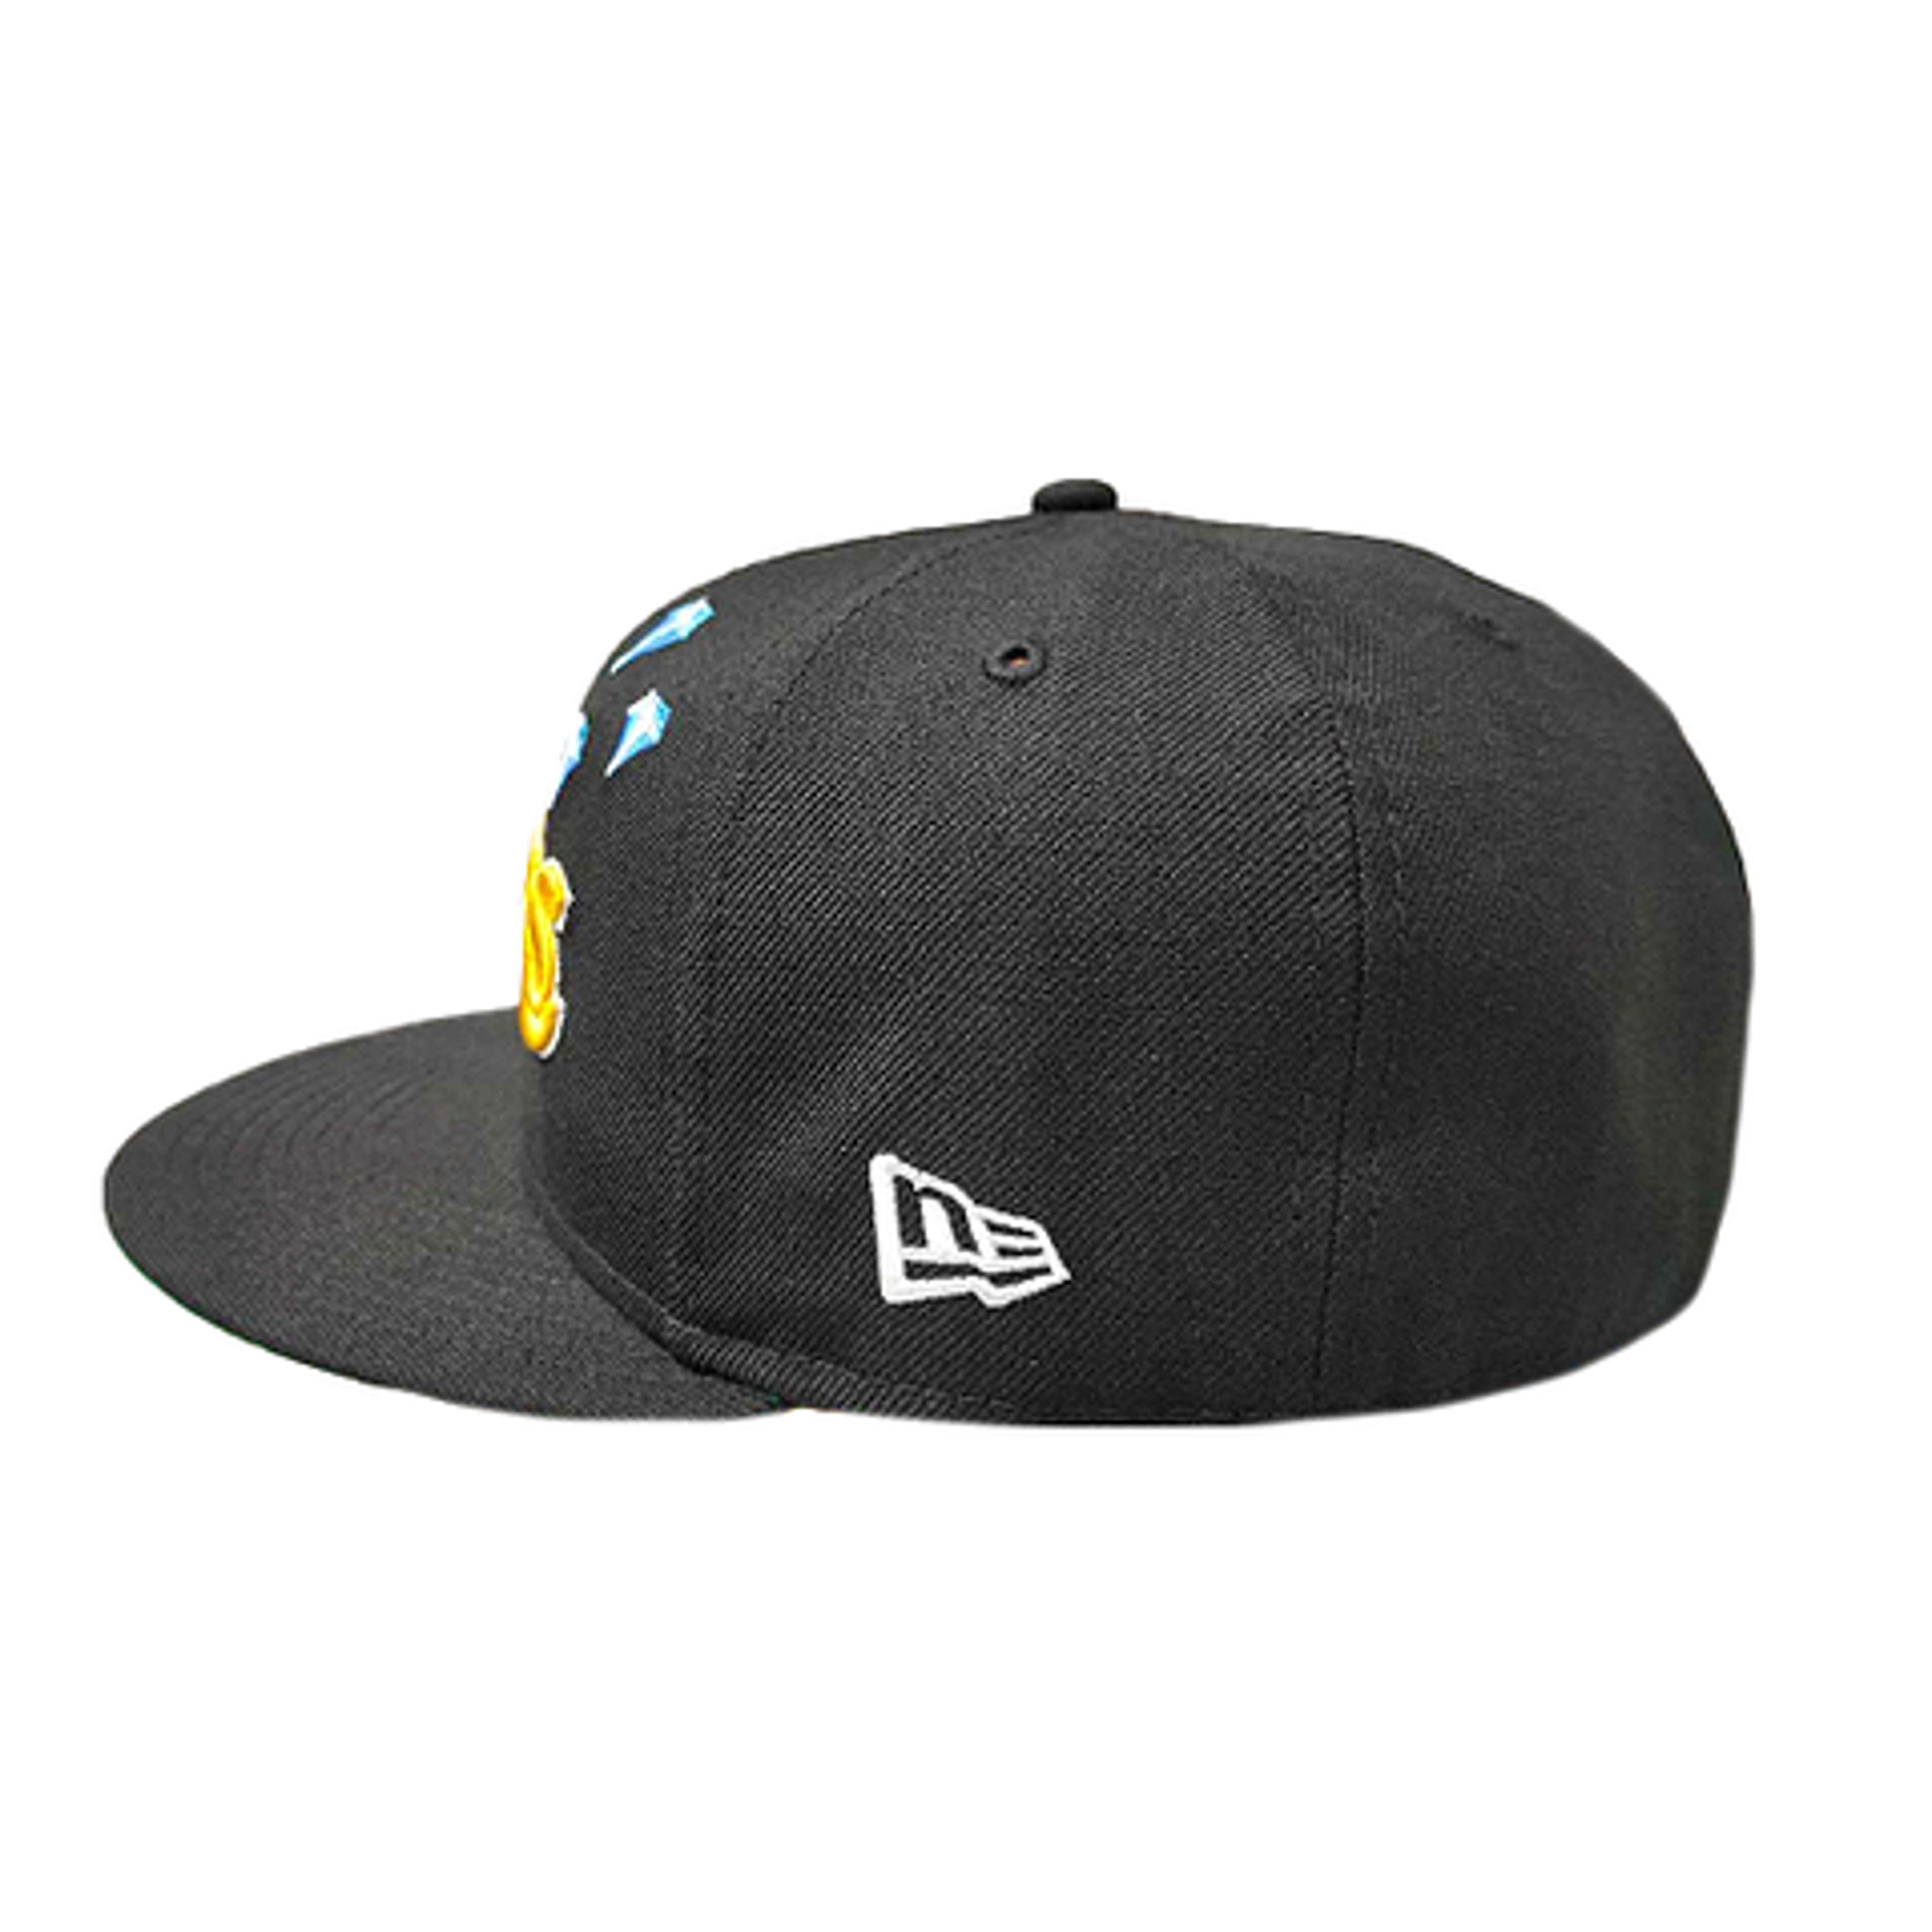 Alternate View 3 of Los Angeles Lakers - Ben Baller 59FIFTY Black